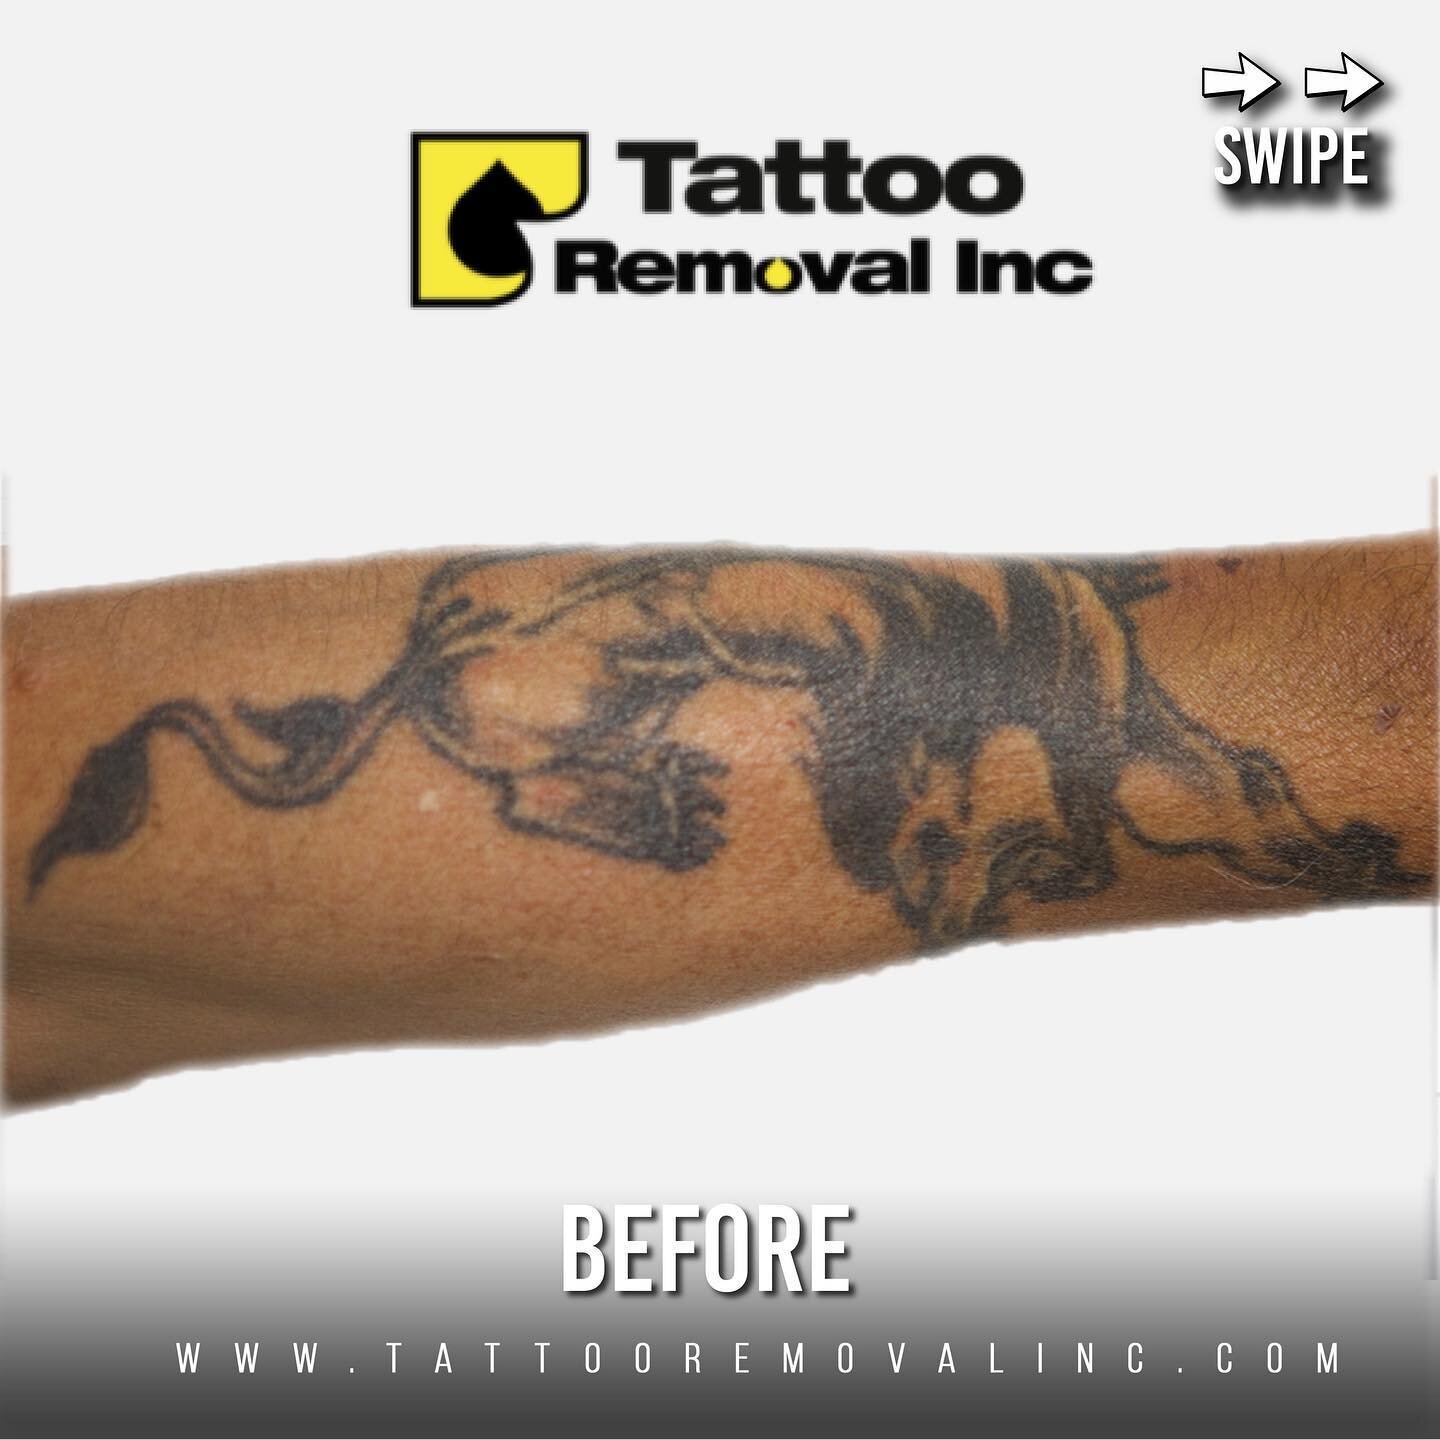 Remembering when they started on their tattoo removal journey to the almost end of the journey
Thank you for your trust 🙏 contact us for any of your tattoo removal needs!

*All results may vary per individual and photos are unfiltered
#unfilteredpho